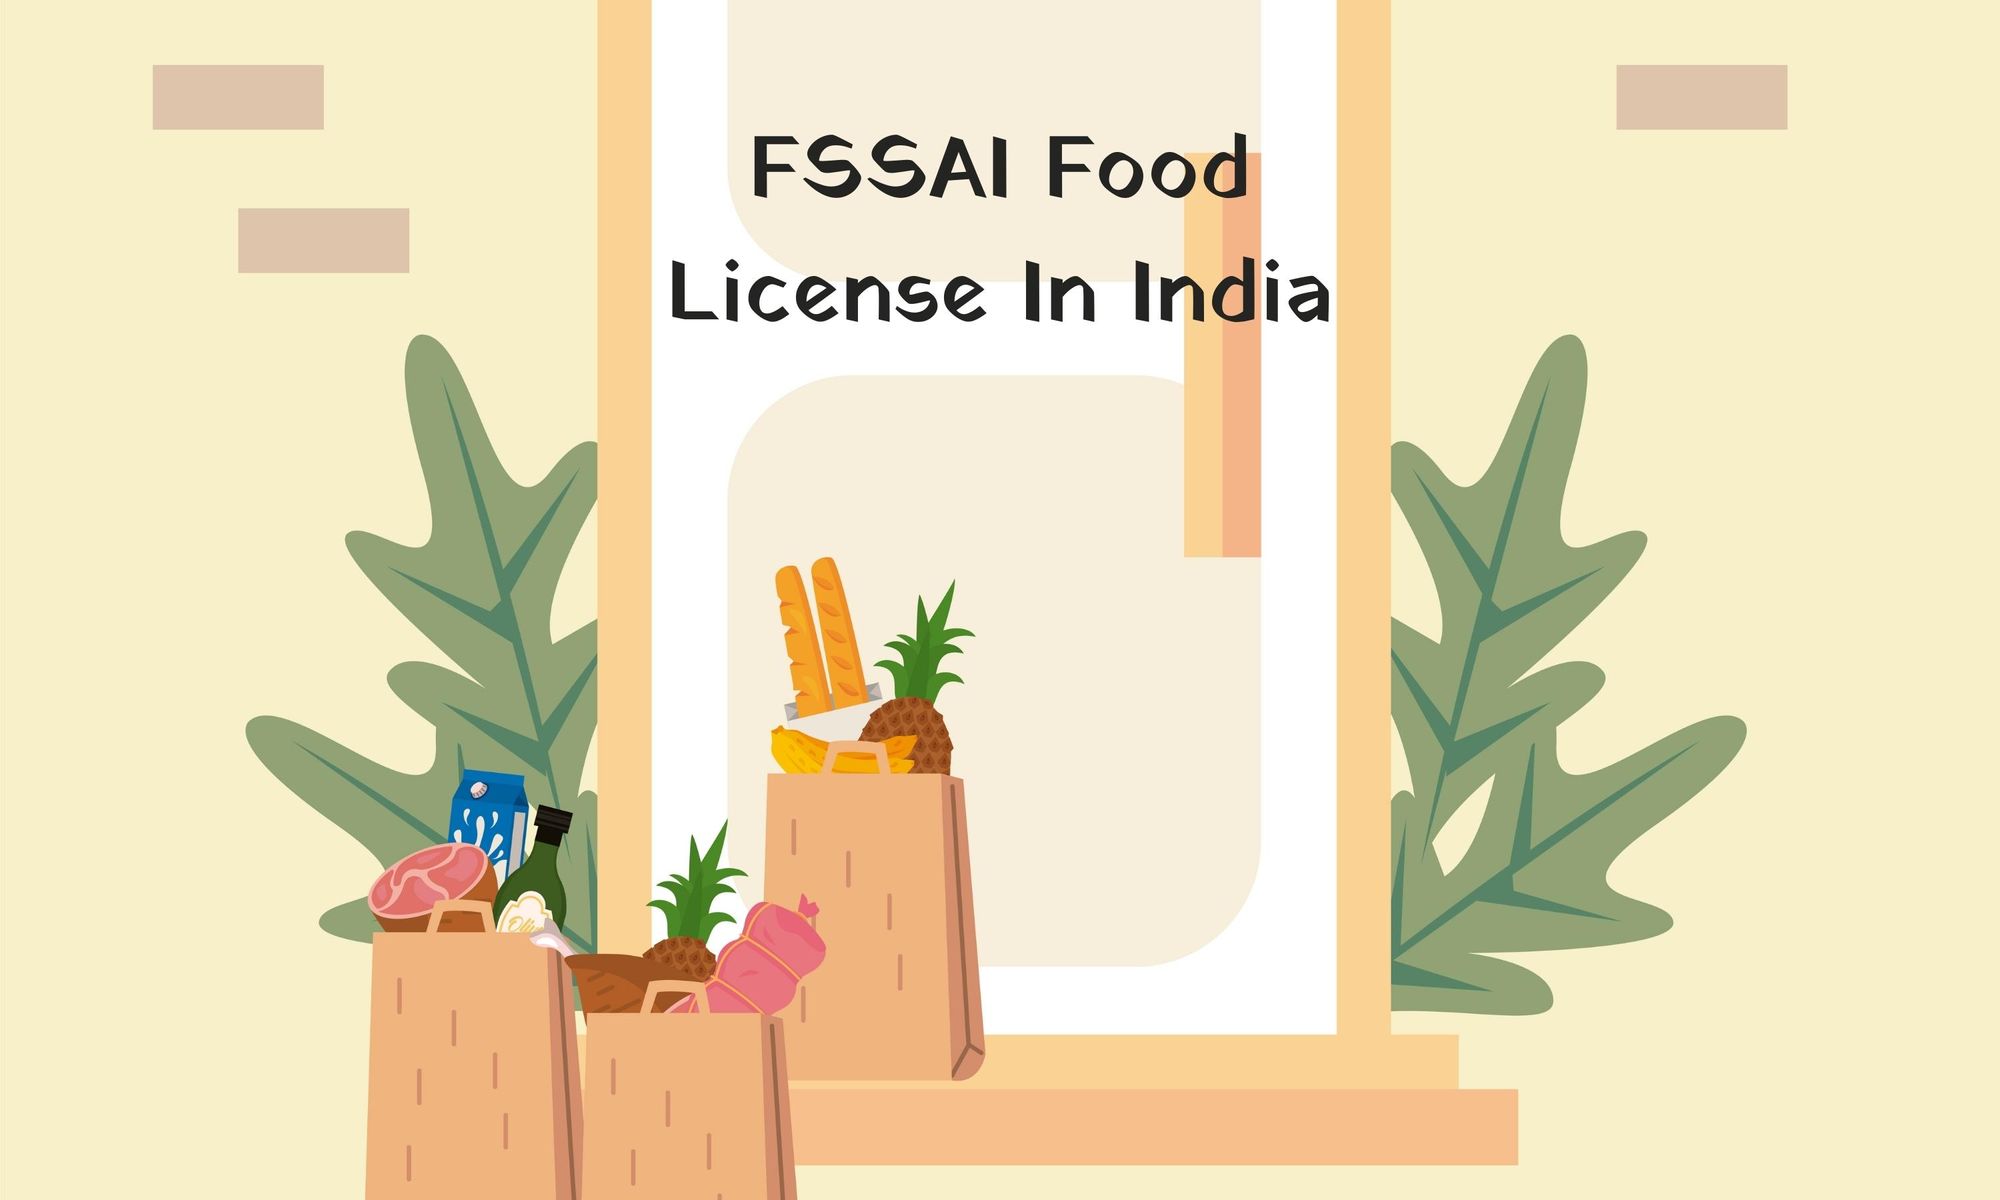 How To Get A FSSAI Food License In India?